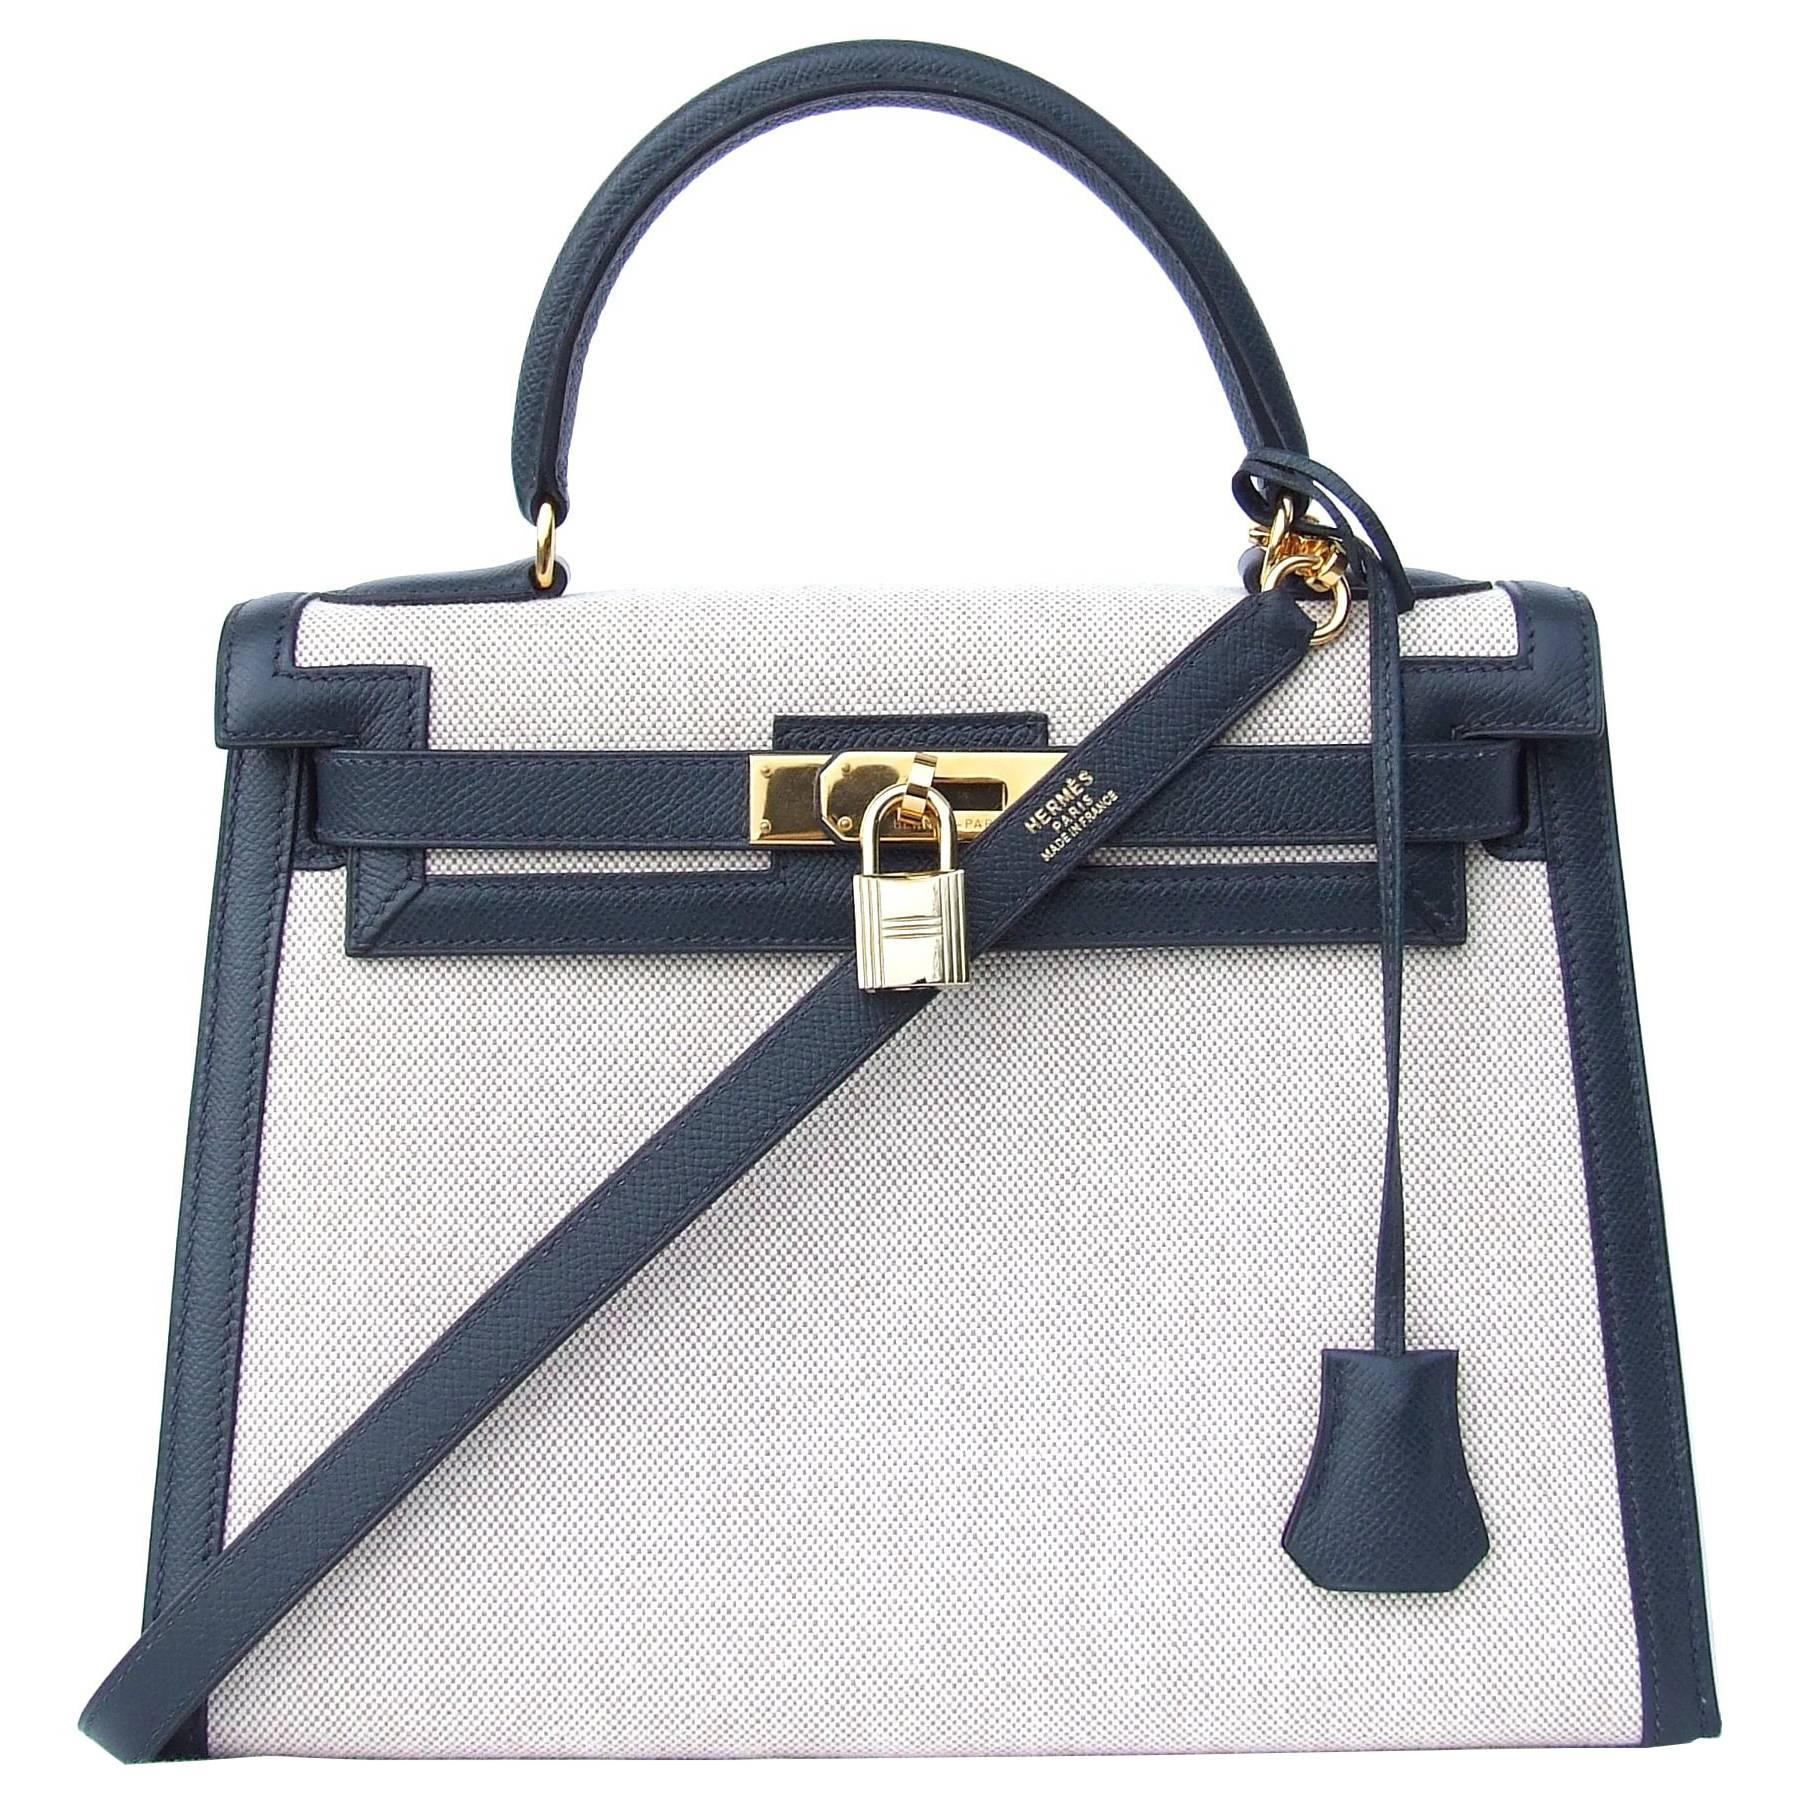 Hermes Kelly 28 Sellier Bag Toile Canvas Courchevel Epsom Navy Blue Leather GHW